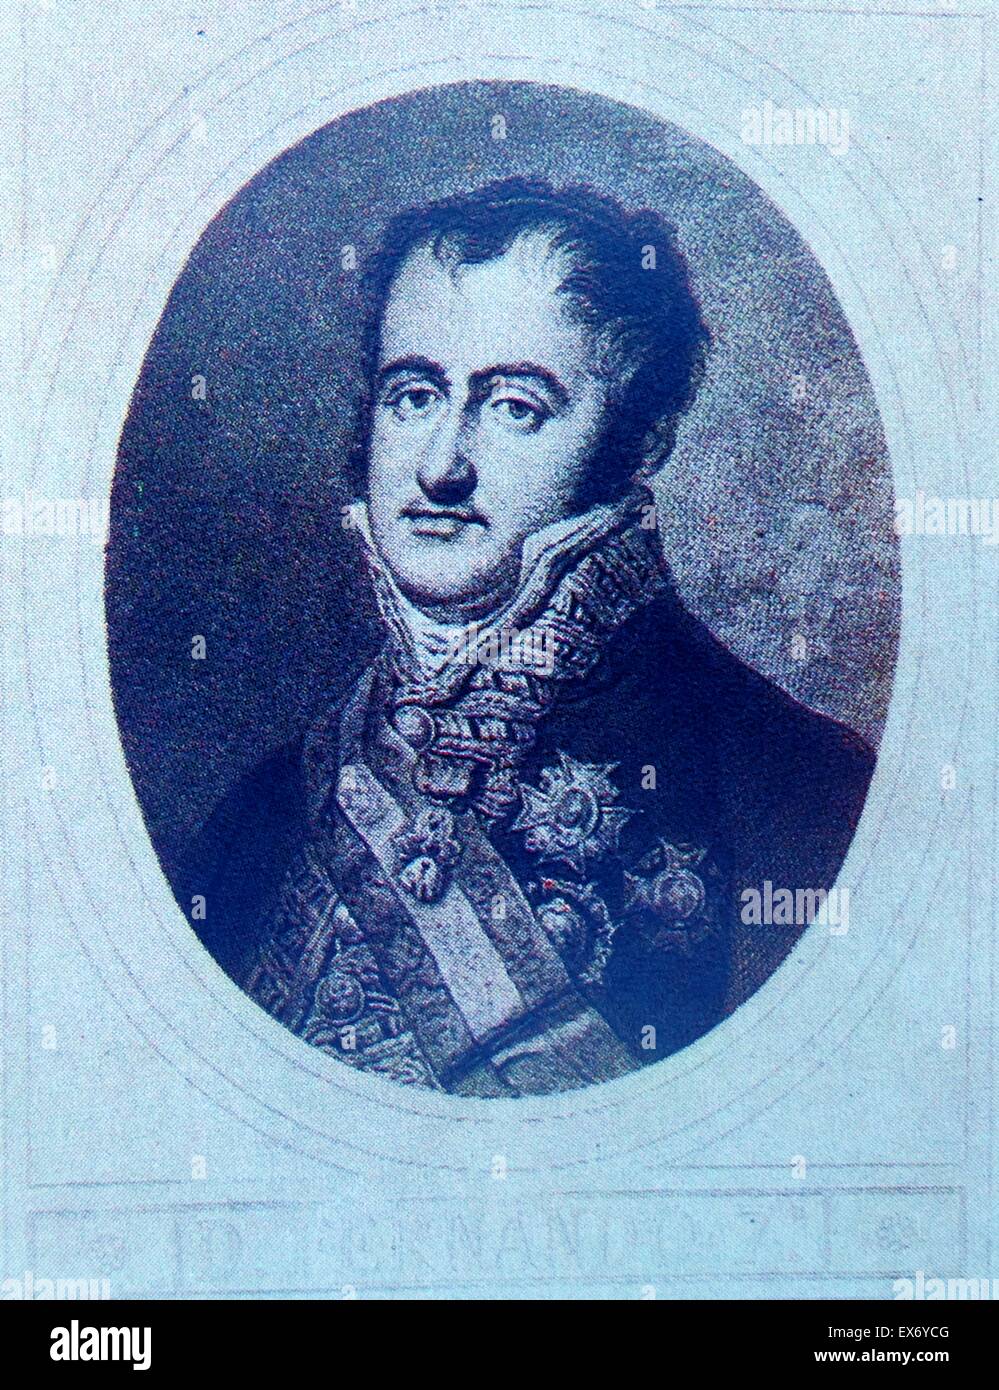 Ferdinand VII (Spanish: Fernando VII de Borbón; 14 October 1784 – 29 September 1833) was twice King of Spain: in 1808 and again from 1813 to his death. He was known to his supporters as 'the Desired' (el Deseado) and to his detractors as the 'Felon King' Stock Photo